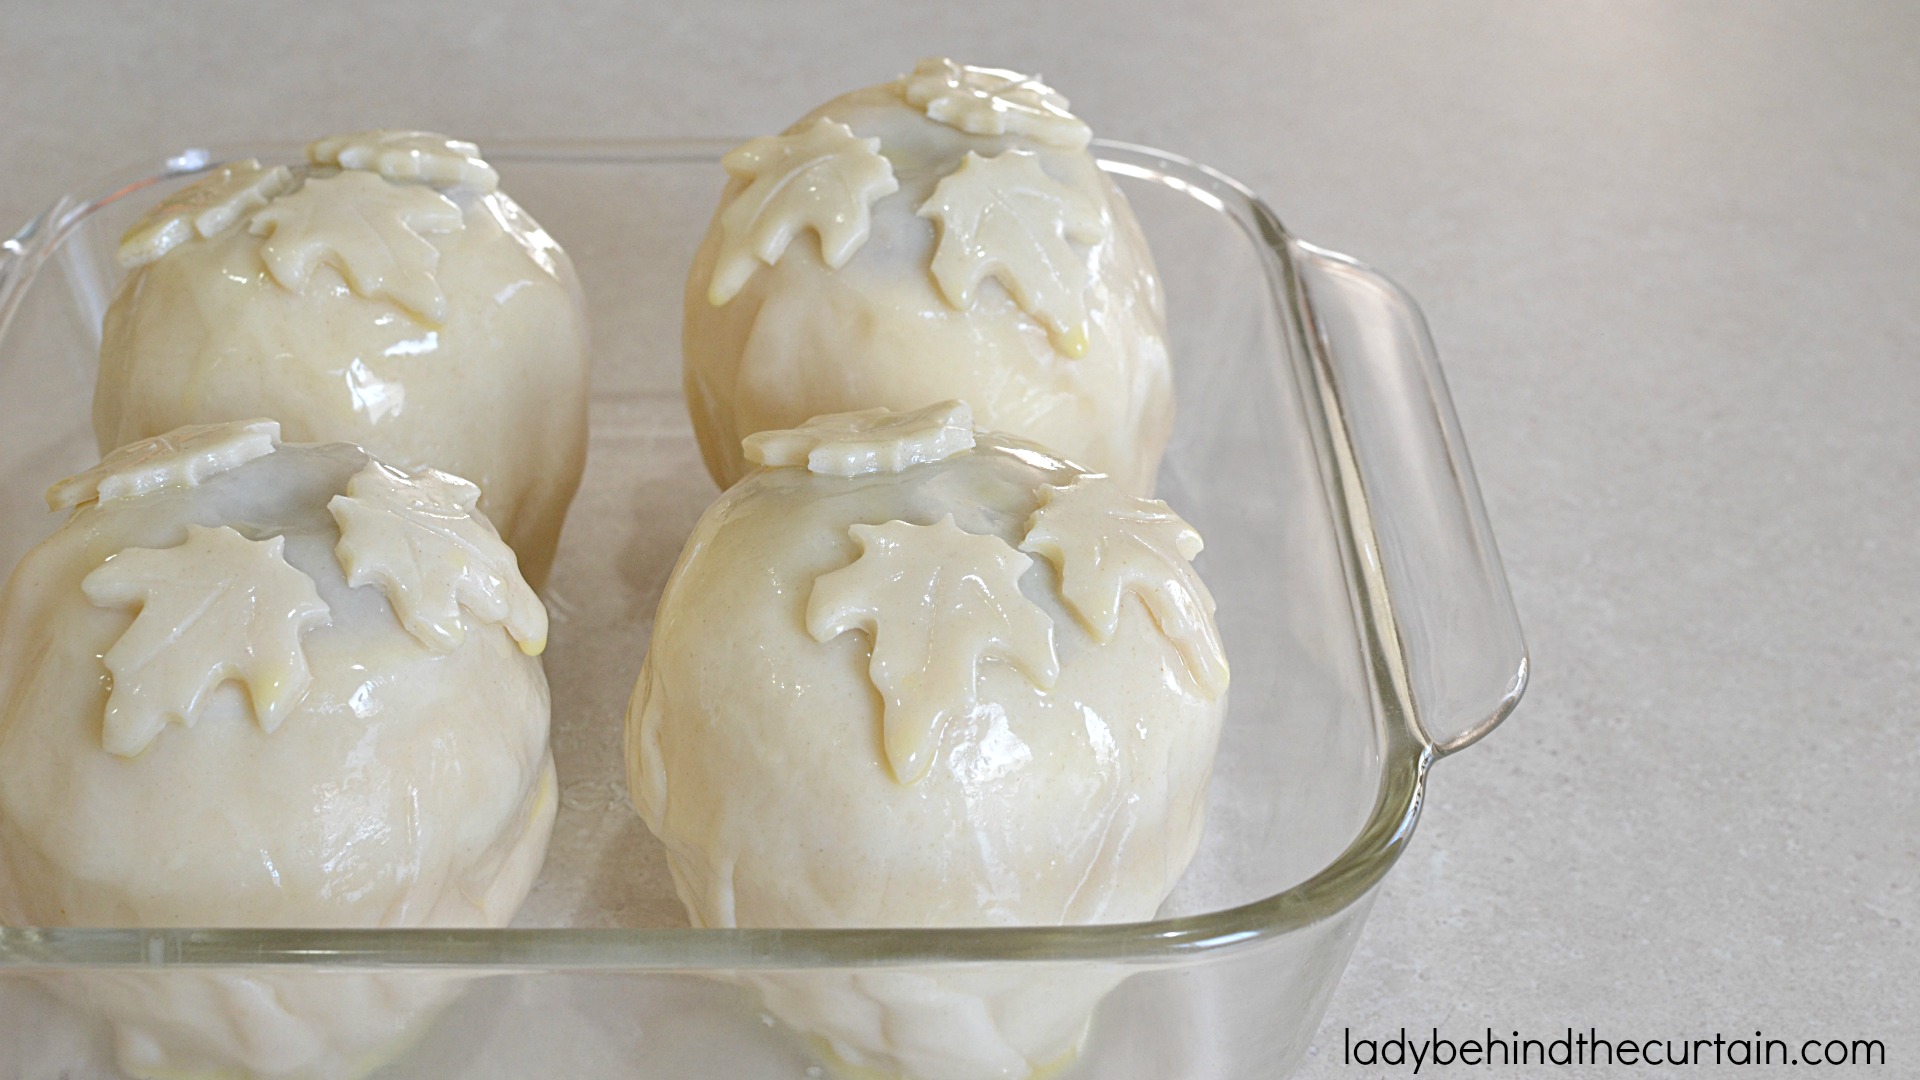 Sweet Apple Dumplings | There are many ways to make apple dumplings... this is my favorite. Plump and juicy in the inside encased with a crispy crust and topped with a drizzle of maple cream.